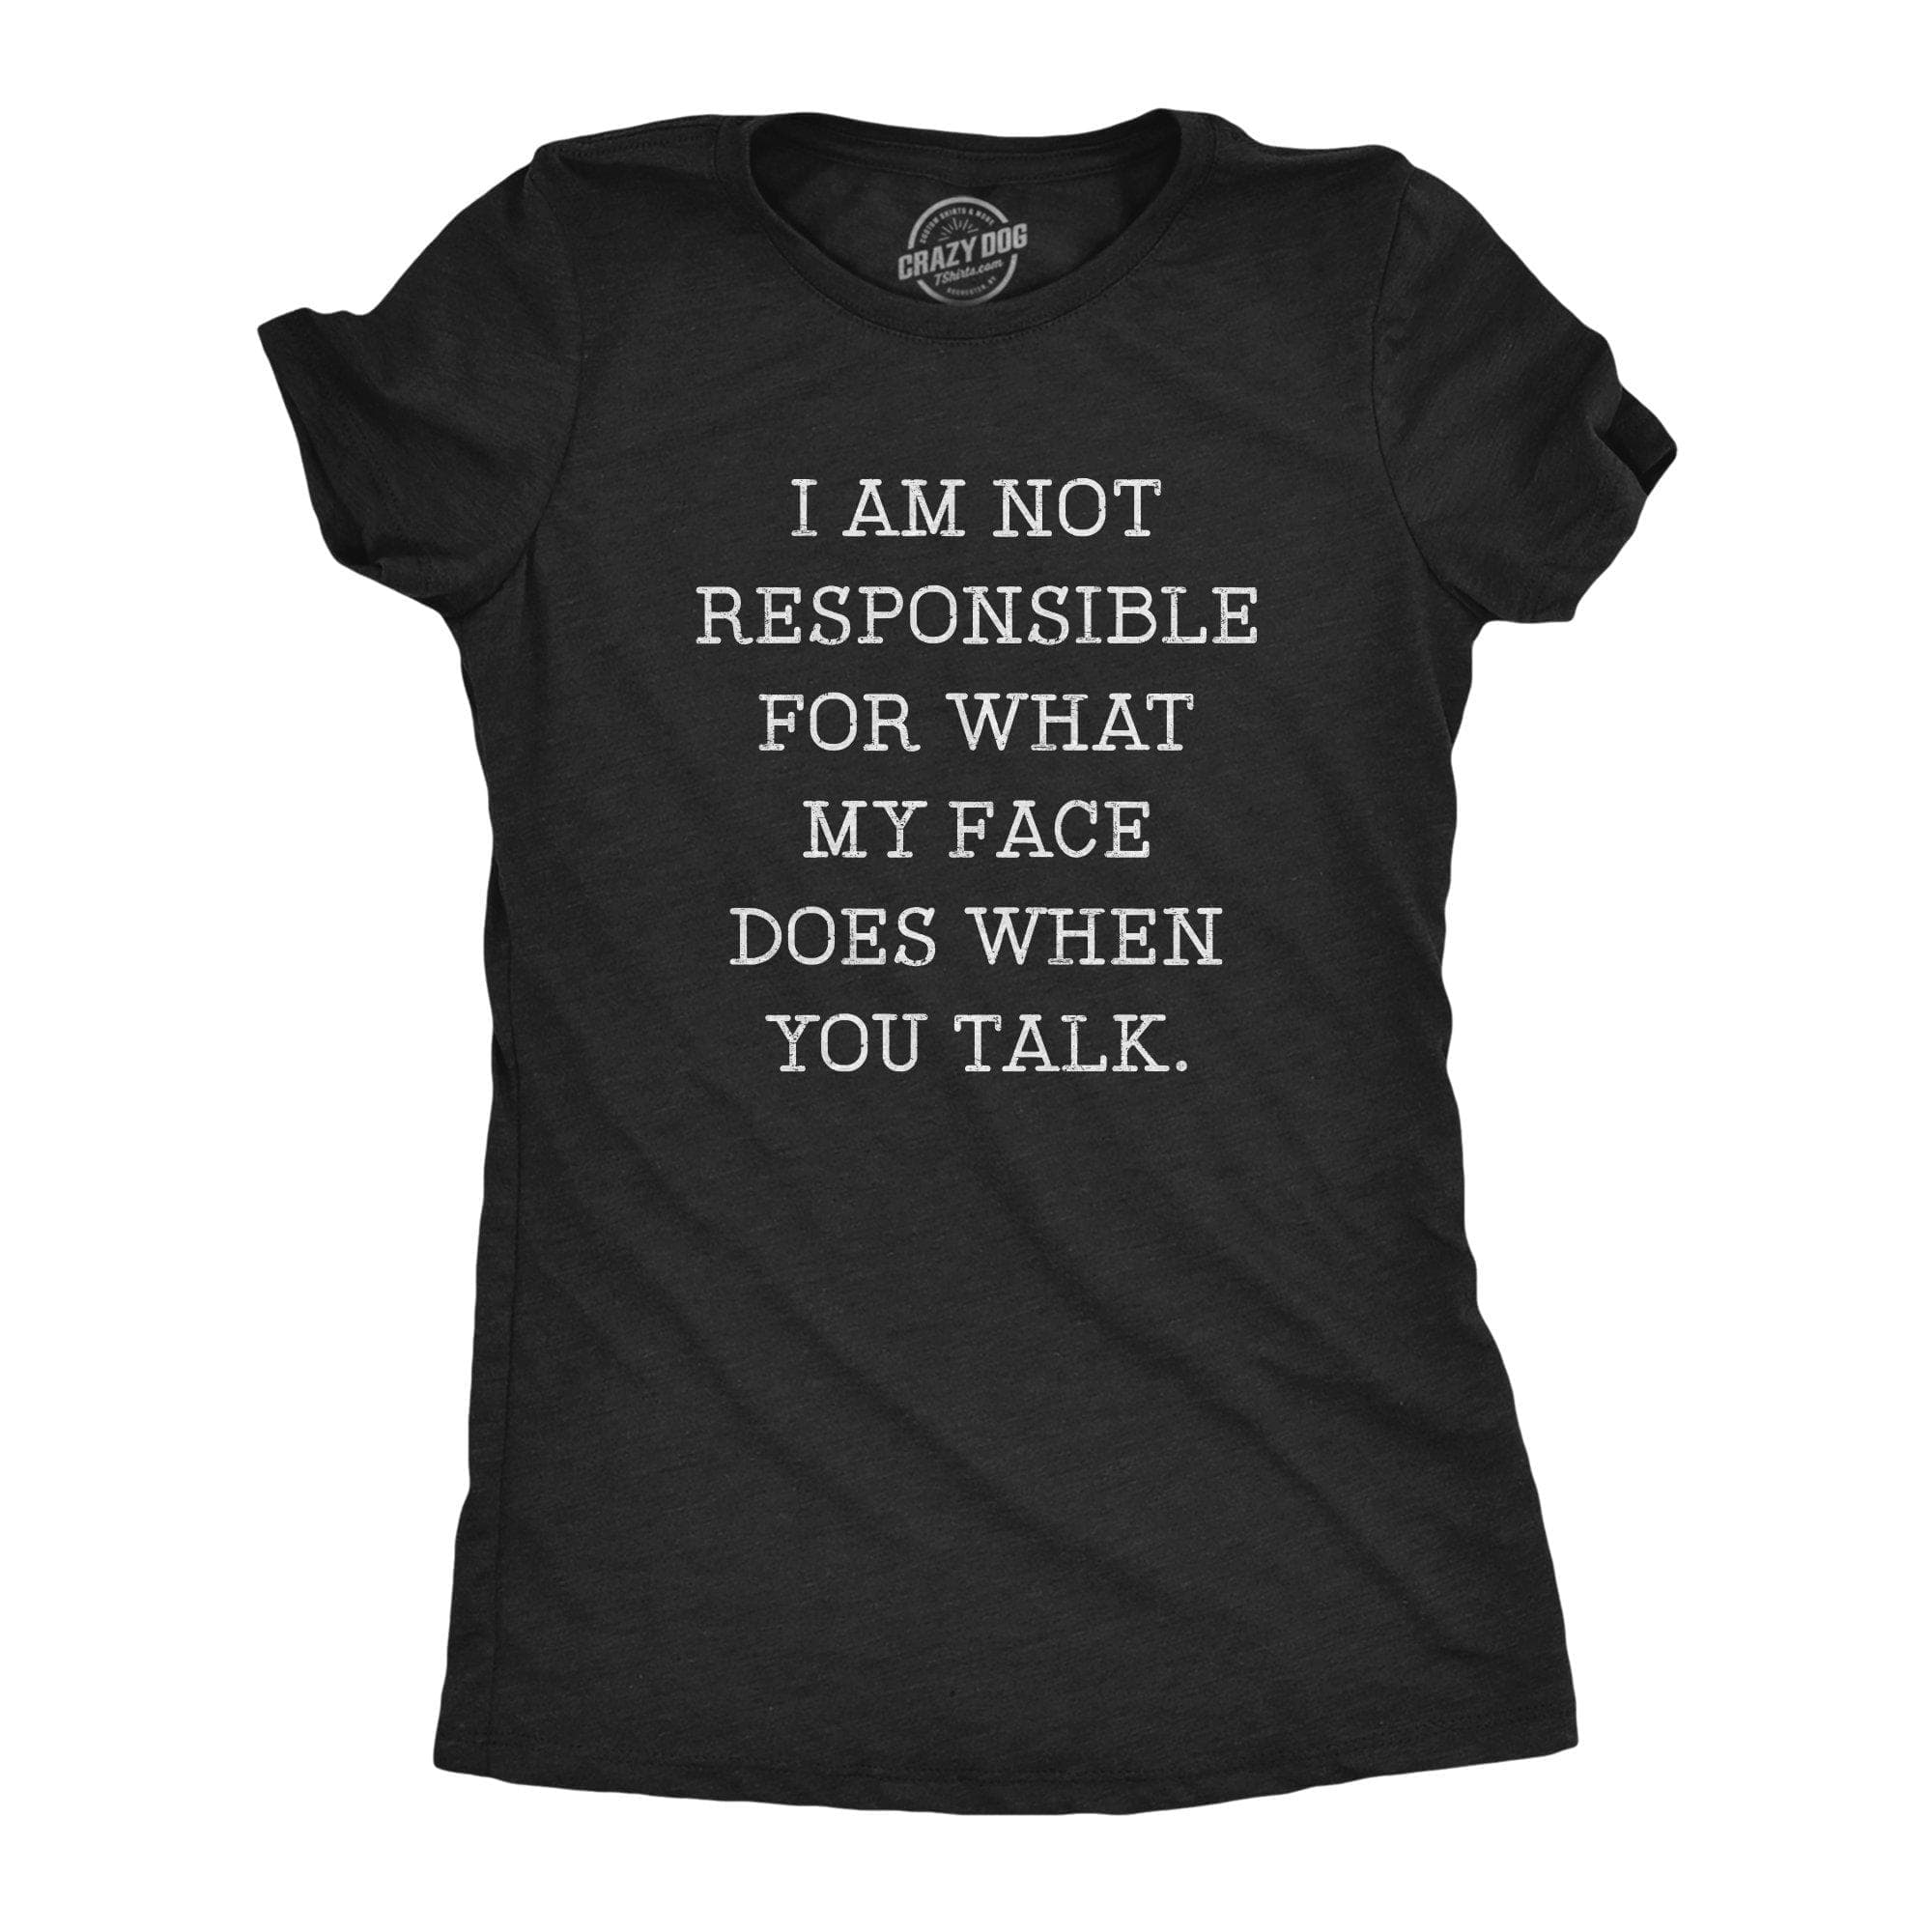 Not Responsible For What My Face Does When You Talk Women's Tshirt - Crazy Dog T-Shirts